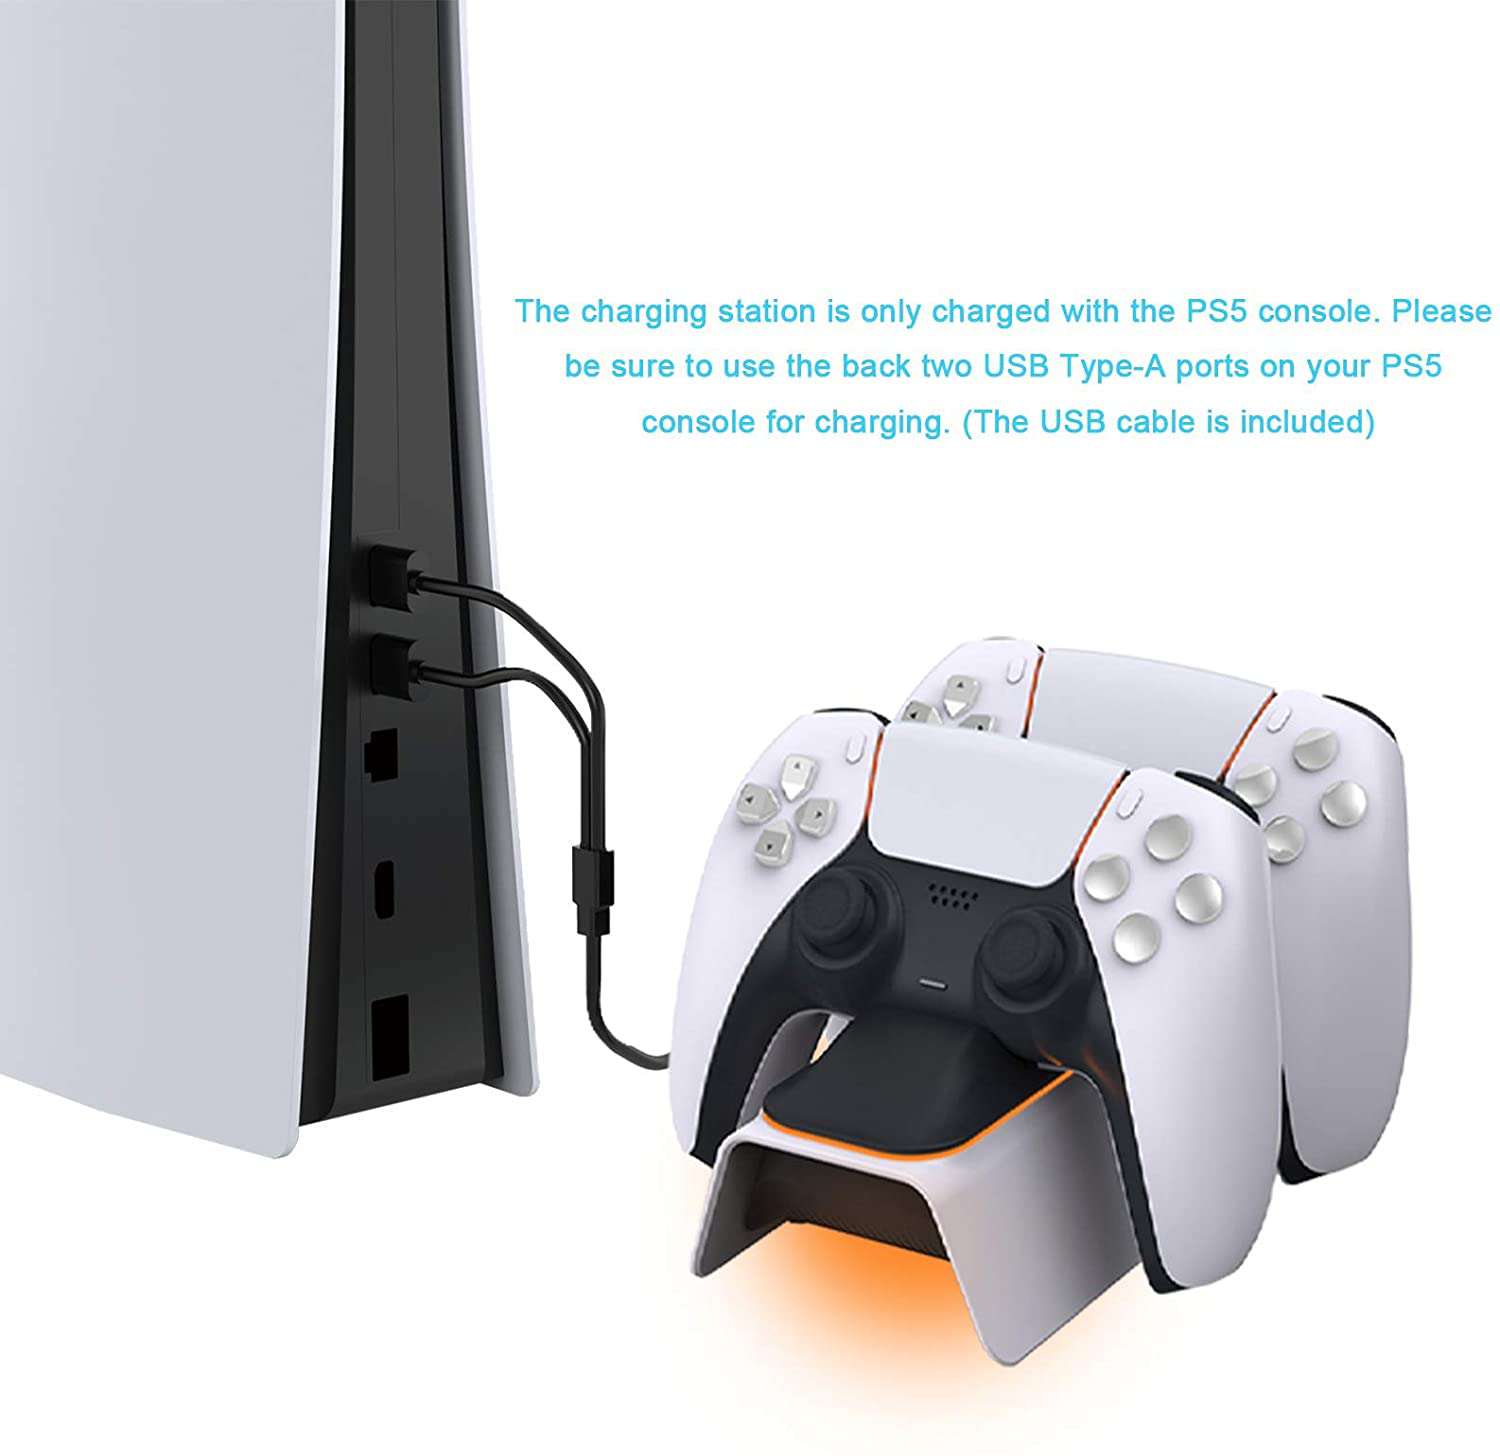 The charging dock is connected to the PS5 console using the Upgraded Dual USB cable.